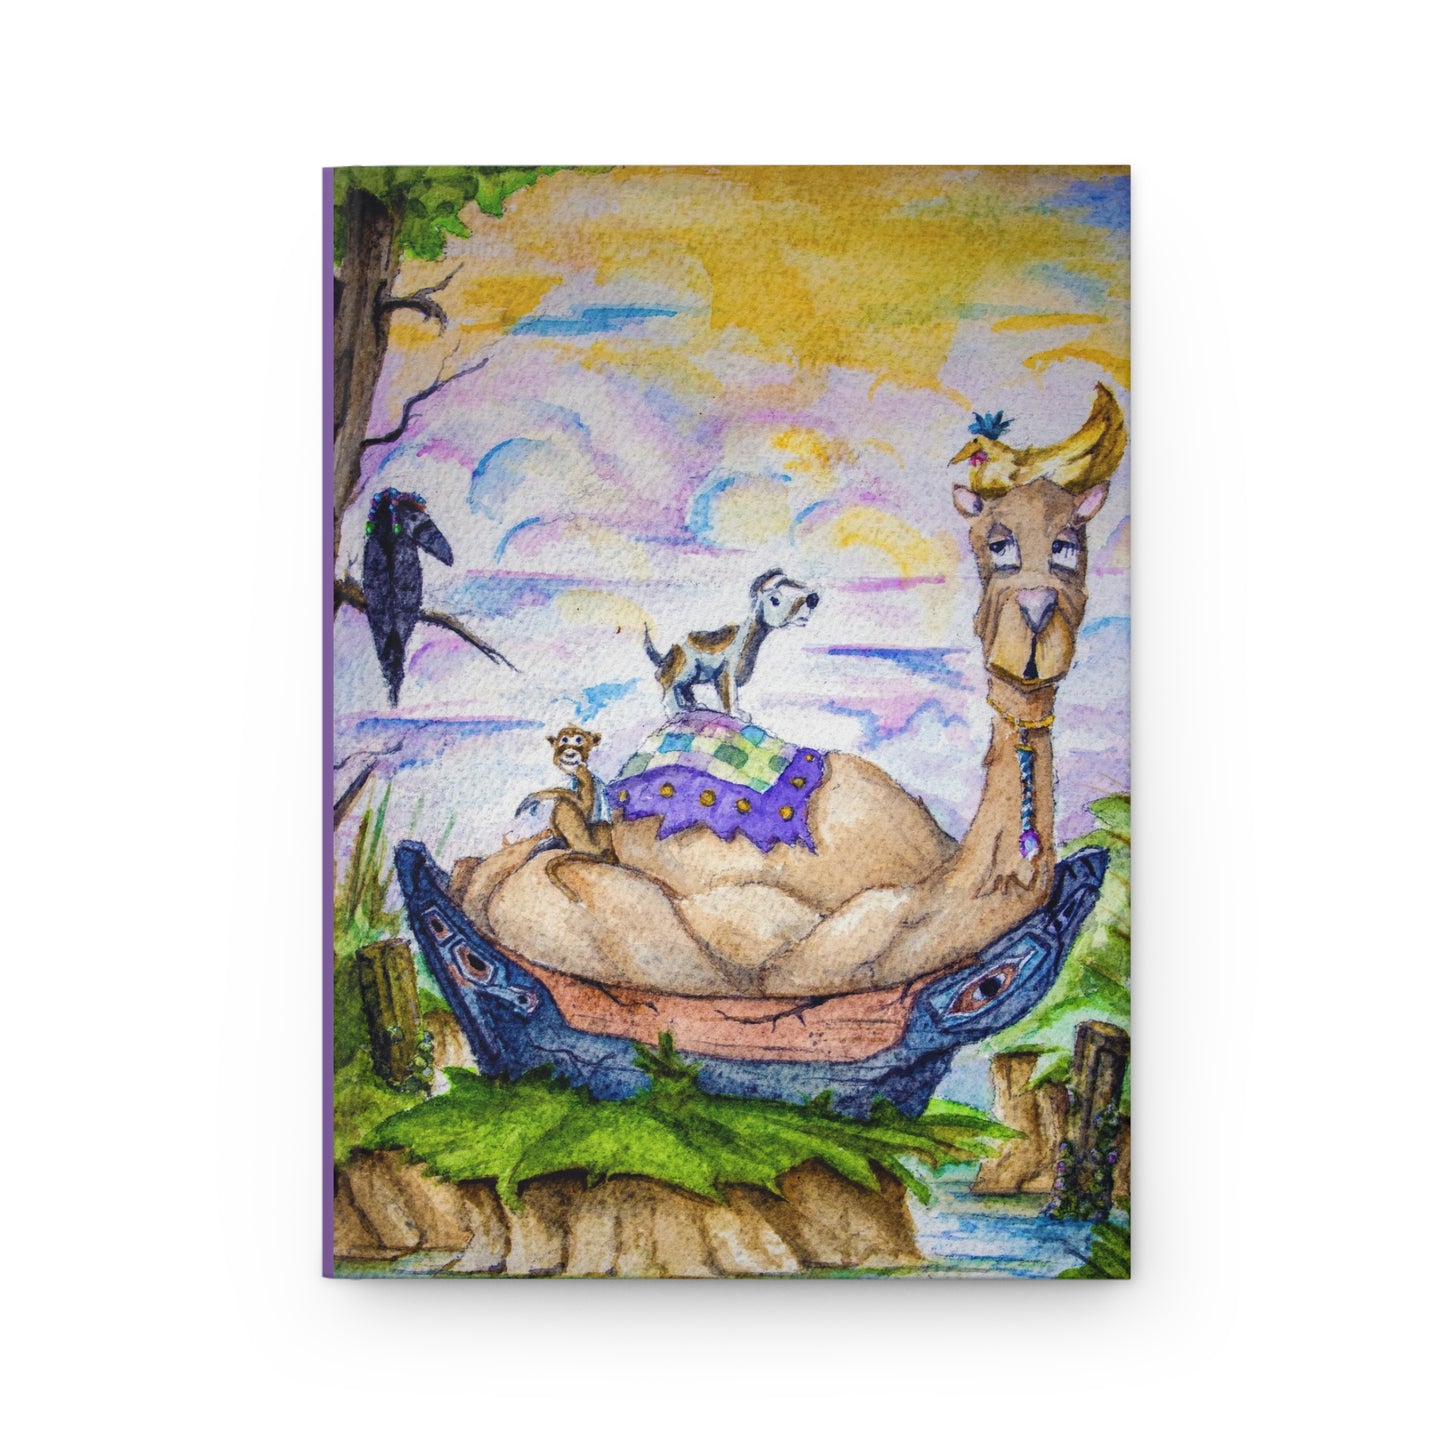 The View - The Chicken Has the Best Spot - Unique Artistic Design, Notebook for Creative Writings, 150 lined pages, Hardcover Matte Journal